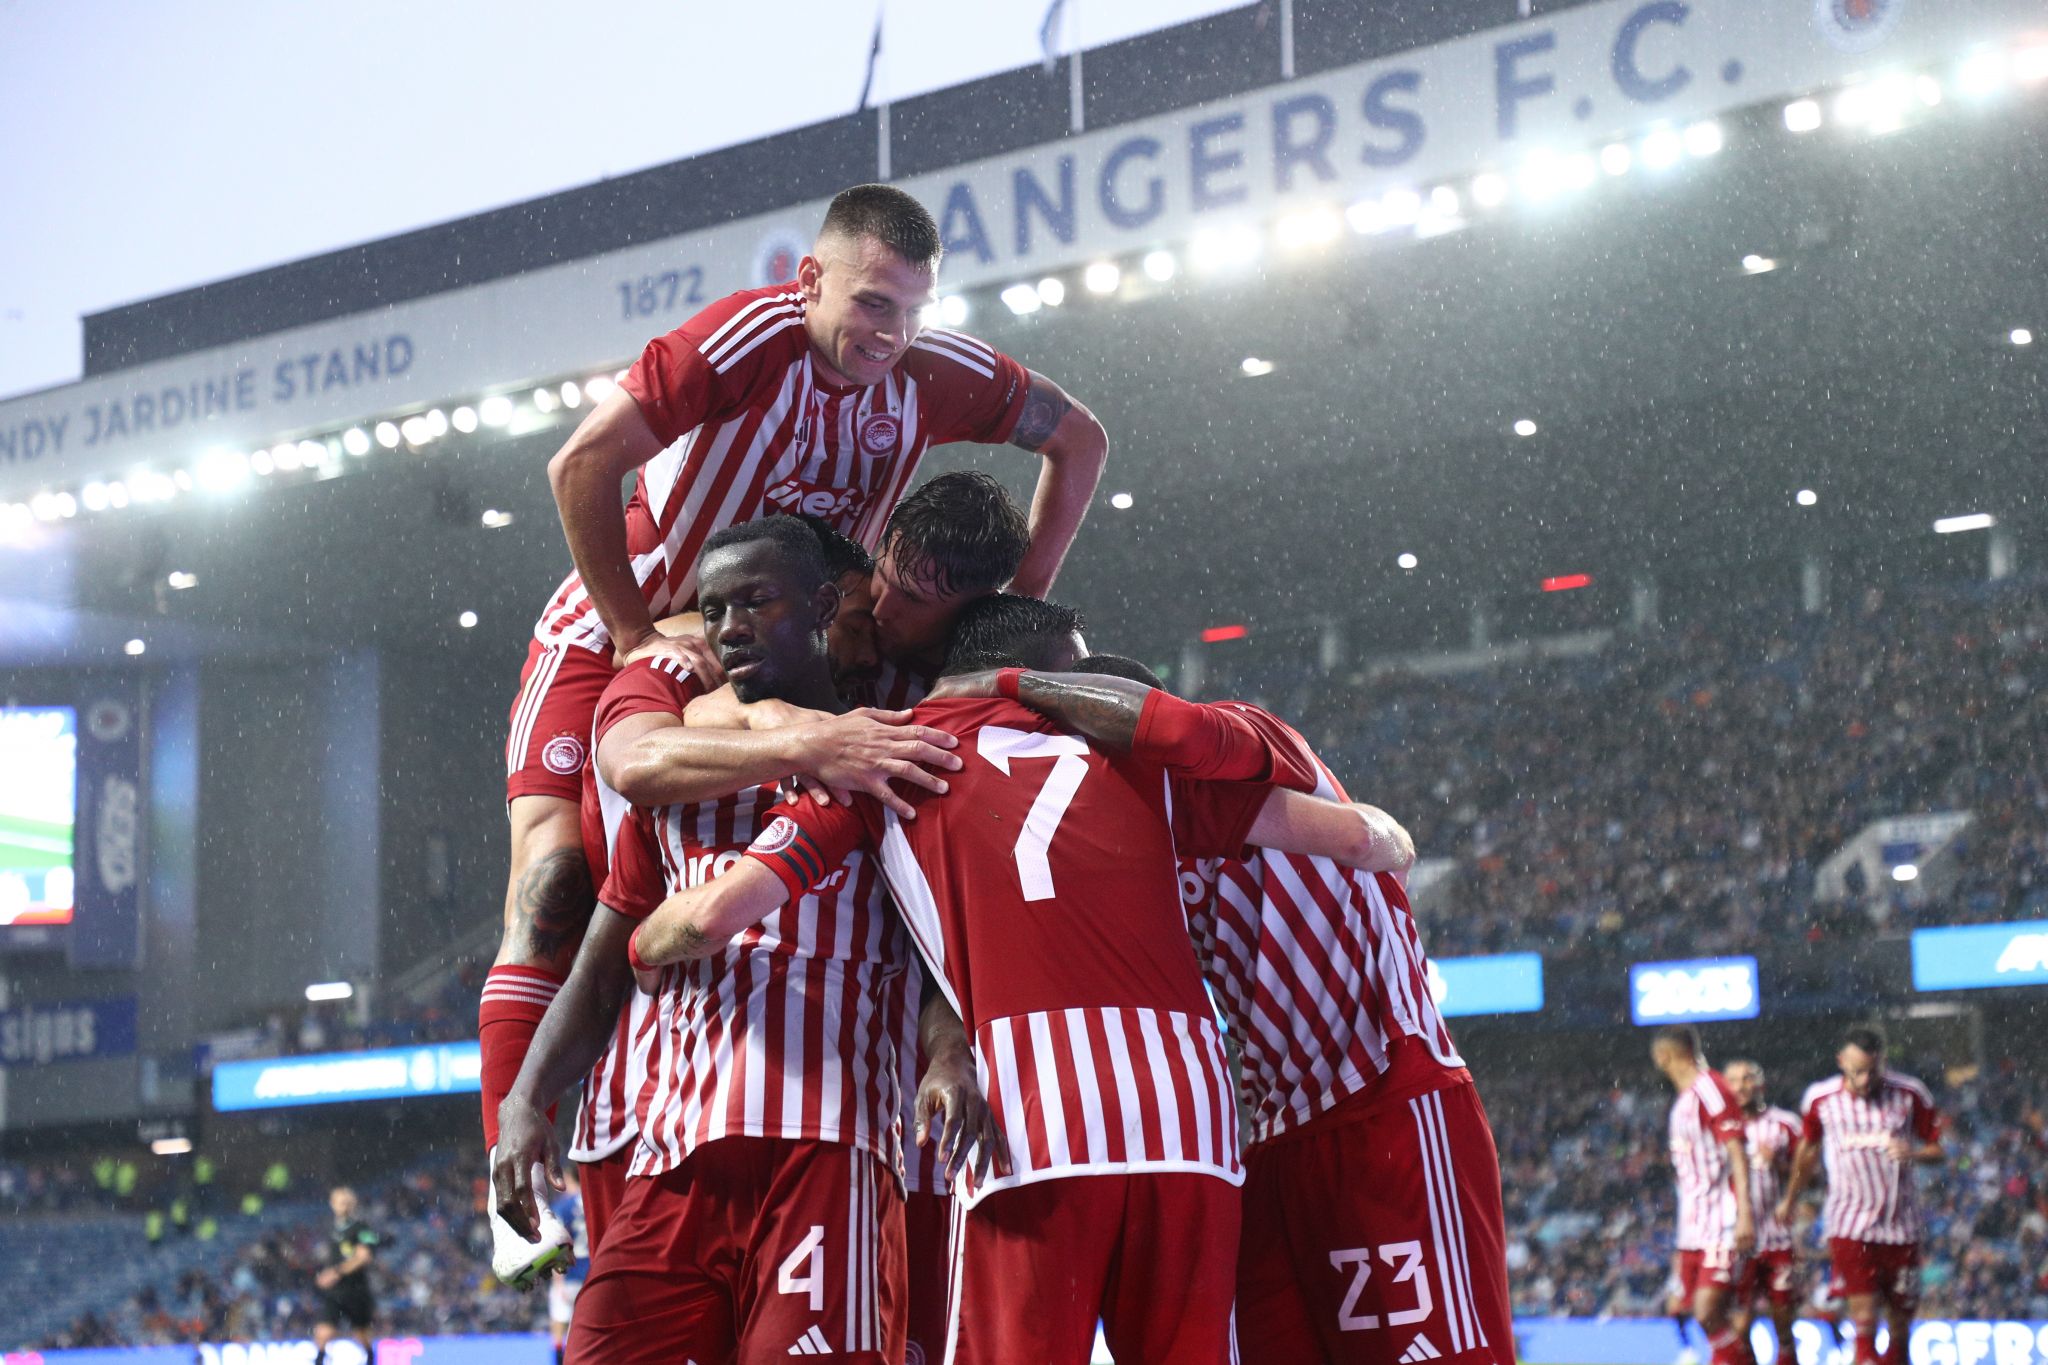 A friendly win in Ibrox for Olympiacos over Rangers